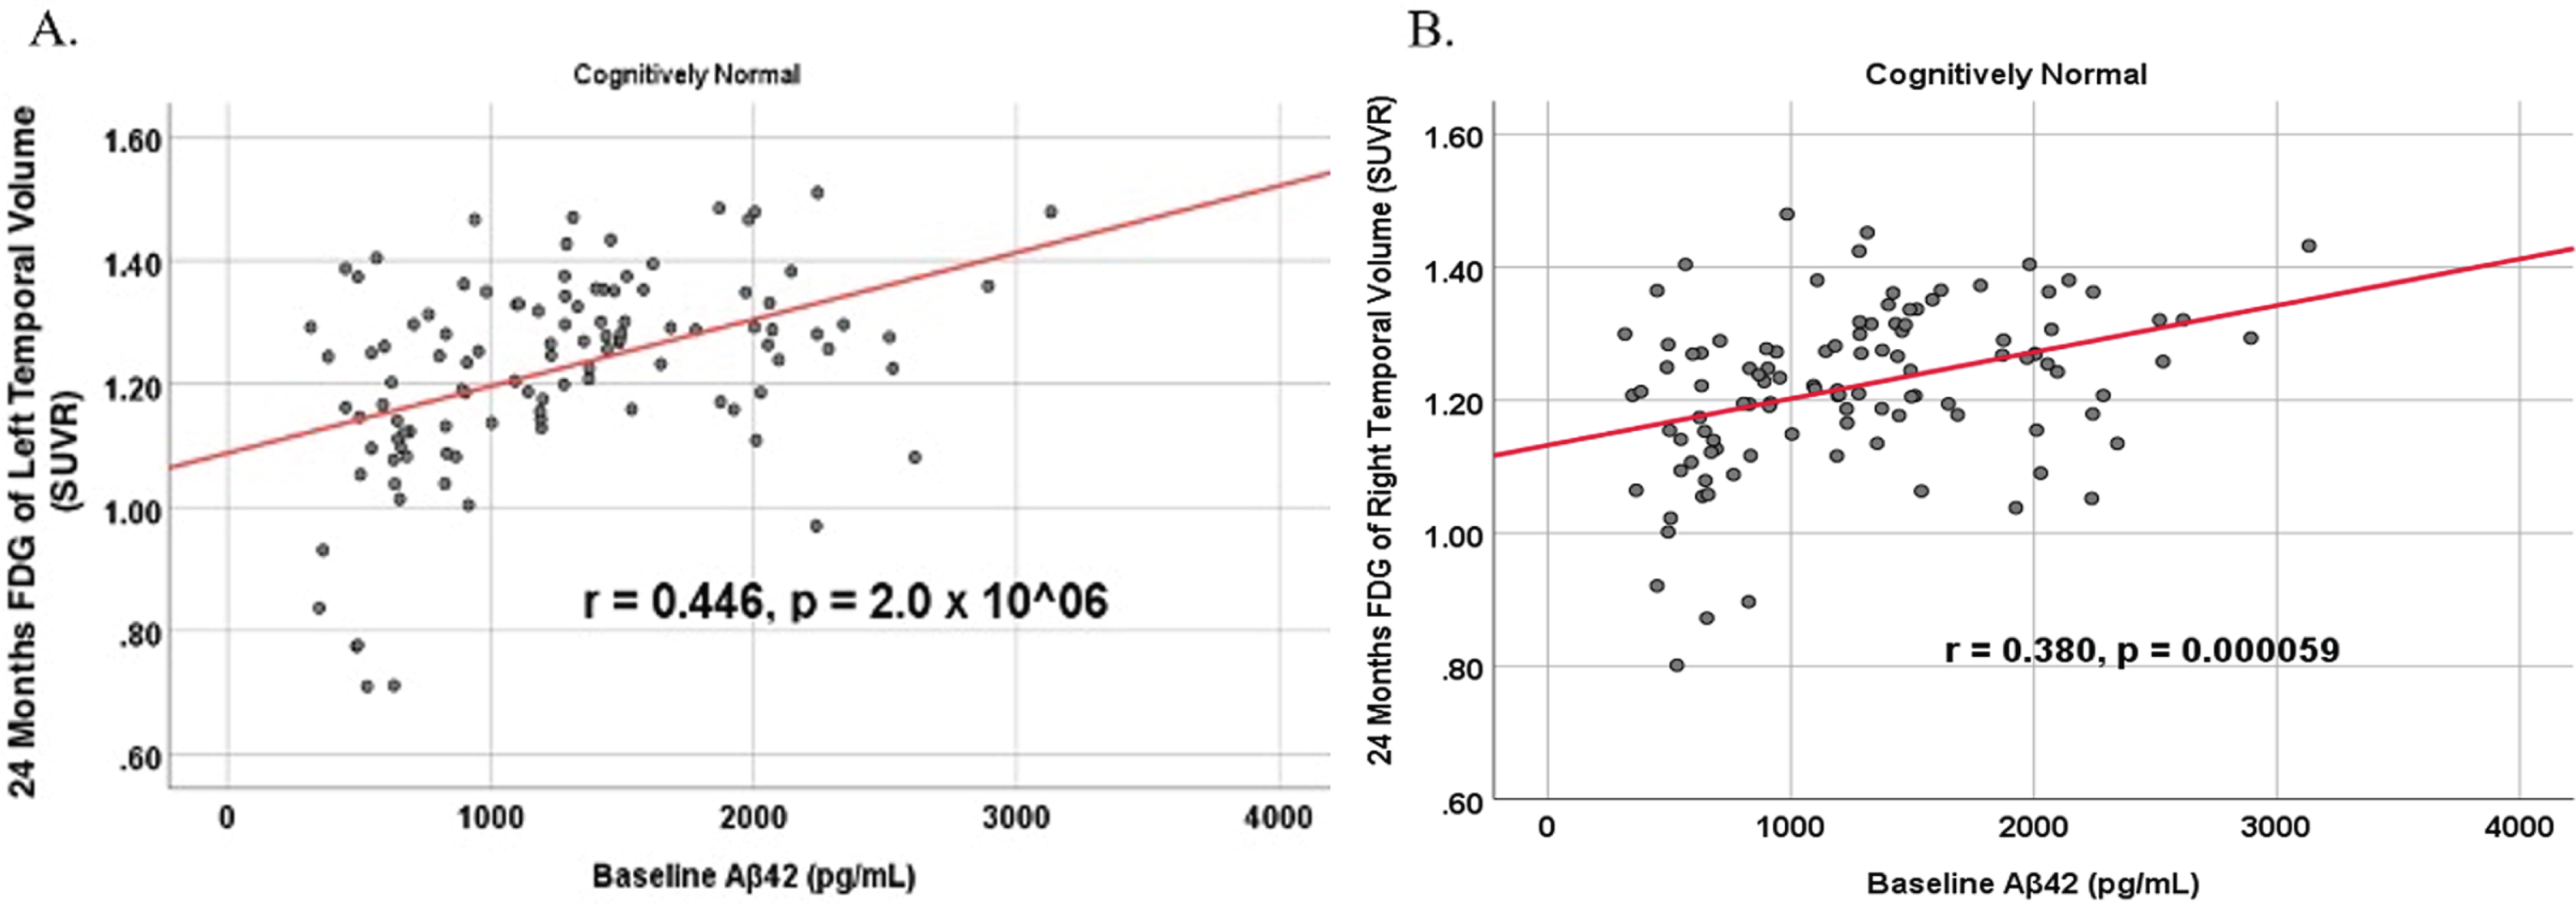 Partial correlations between baseline Aβ42 and 24 Month FDG brain volume regions in cognitively unimpaired control participants, corrected for age and education. Scatterplots above are corrected for age and education. A) Aβ42 versus Left Temporal (r = 0.446, p = 2.0×10-6). B) Aβ42 versus Right Temporal (r = 0.380, p = 0.000059).